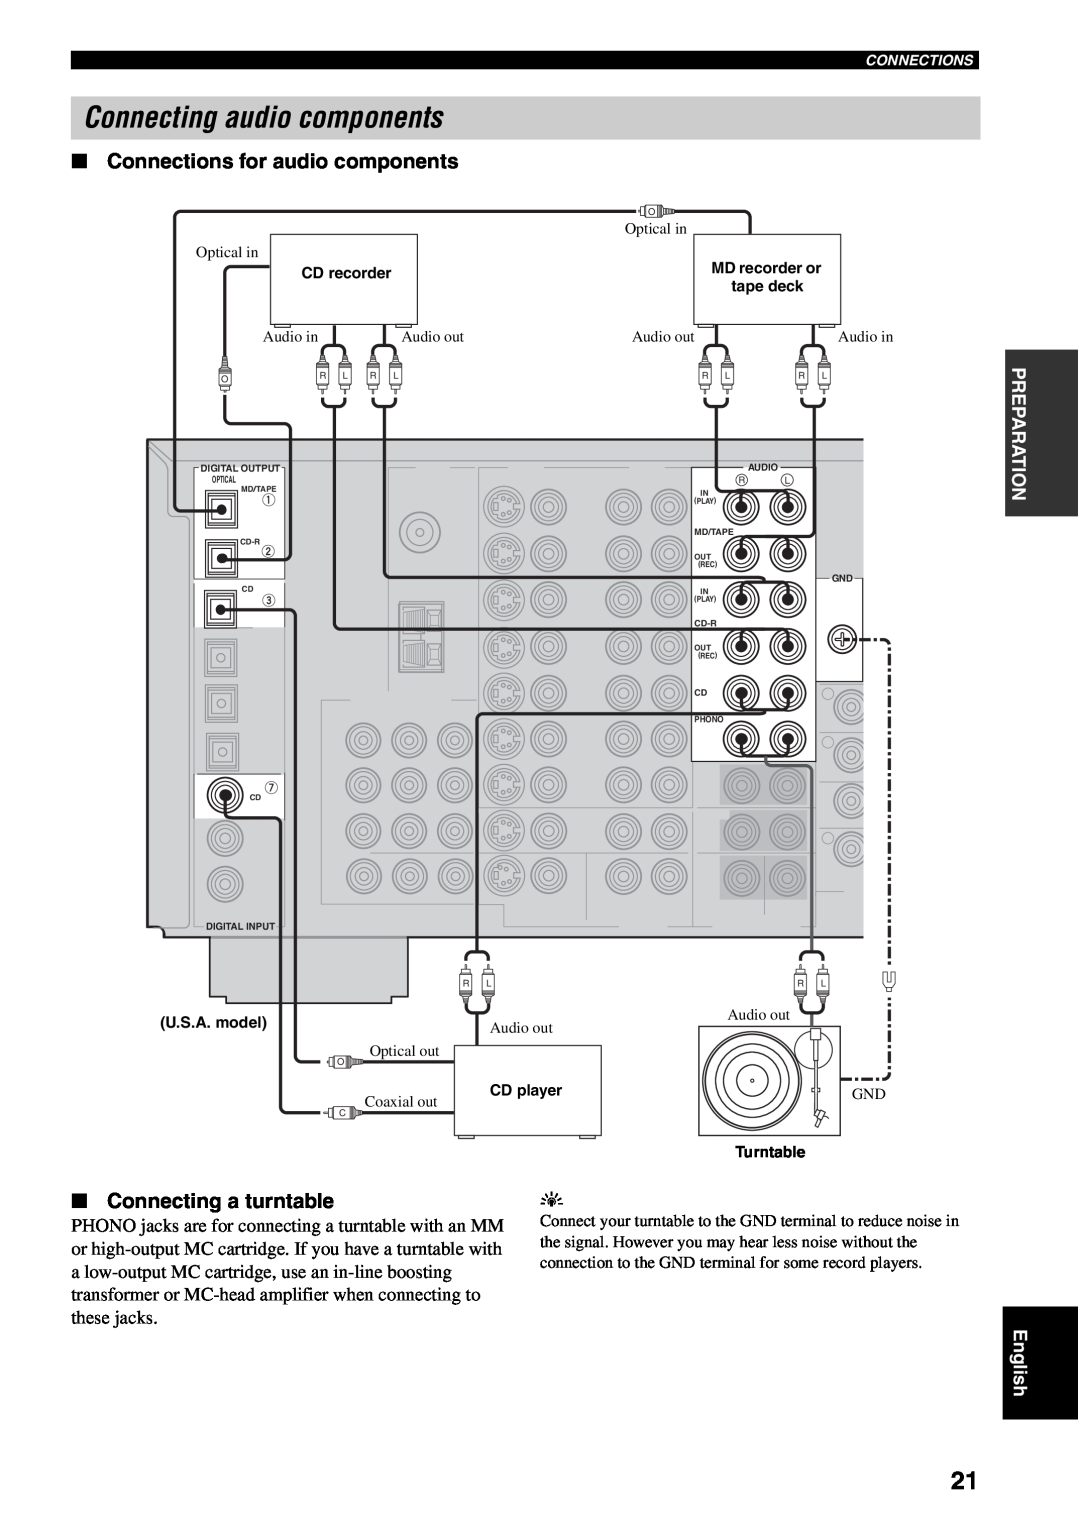 Yamaha RX-V2500 owner manual Connecting audio components, Connections for audio components, Connecting a turntable 